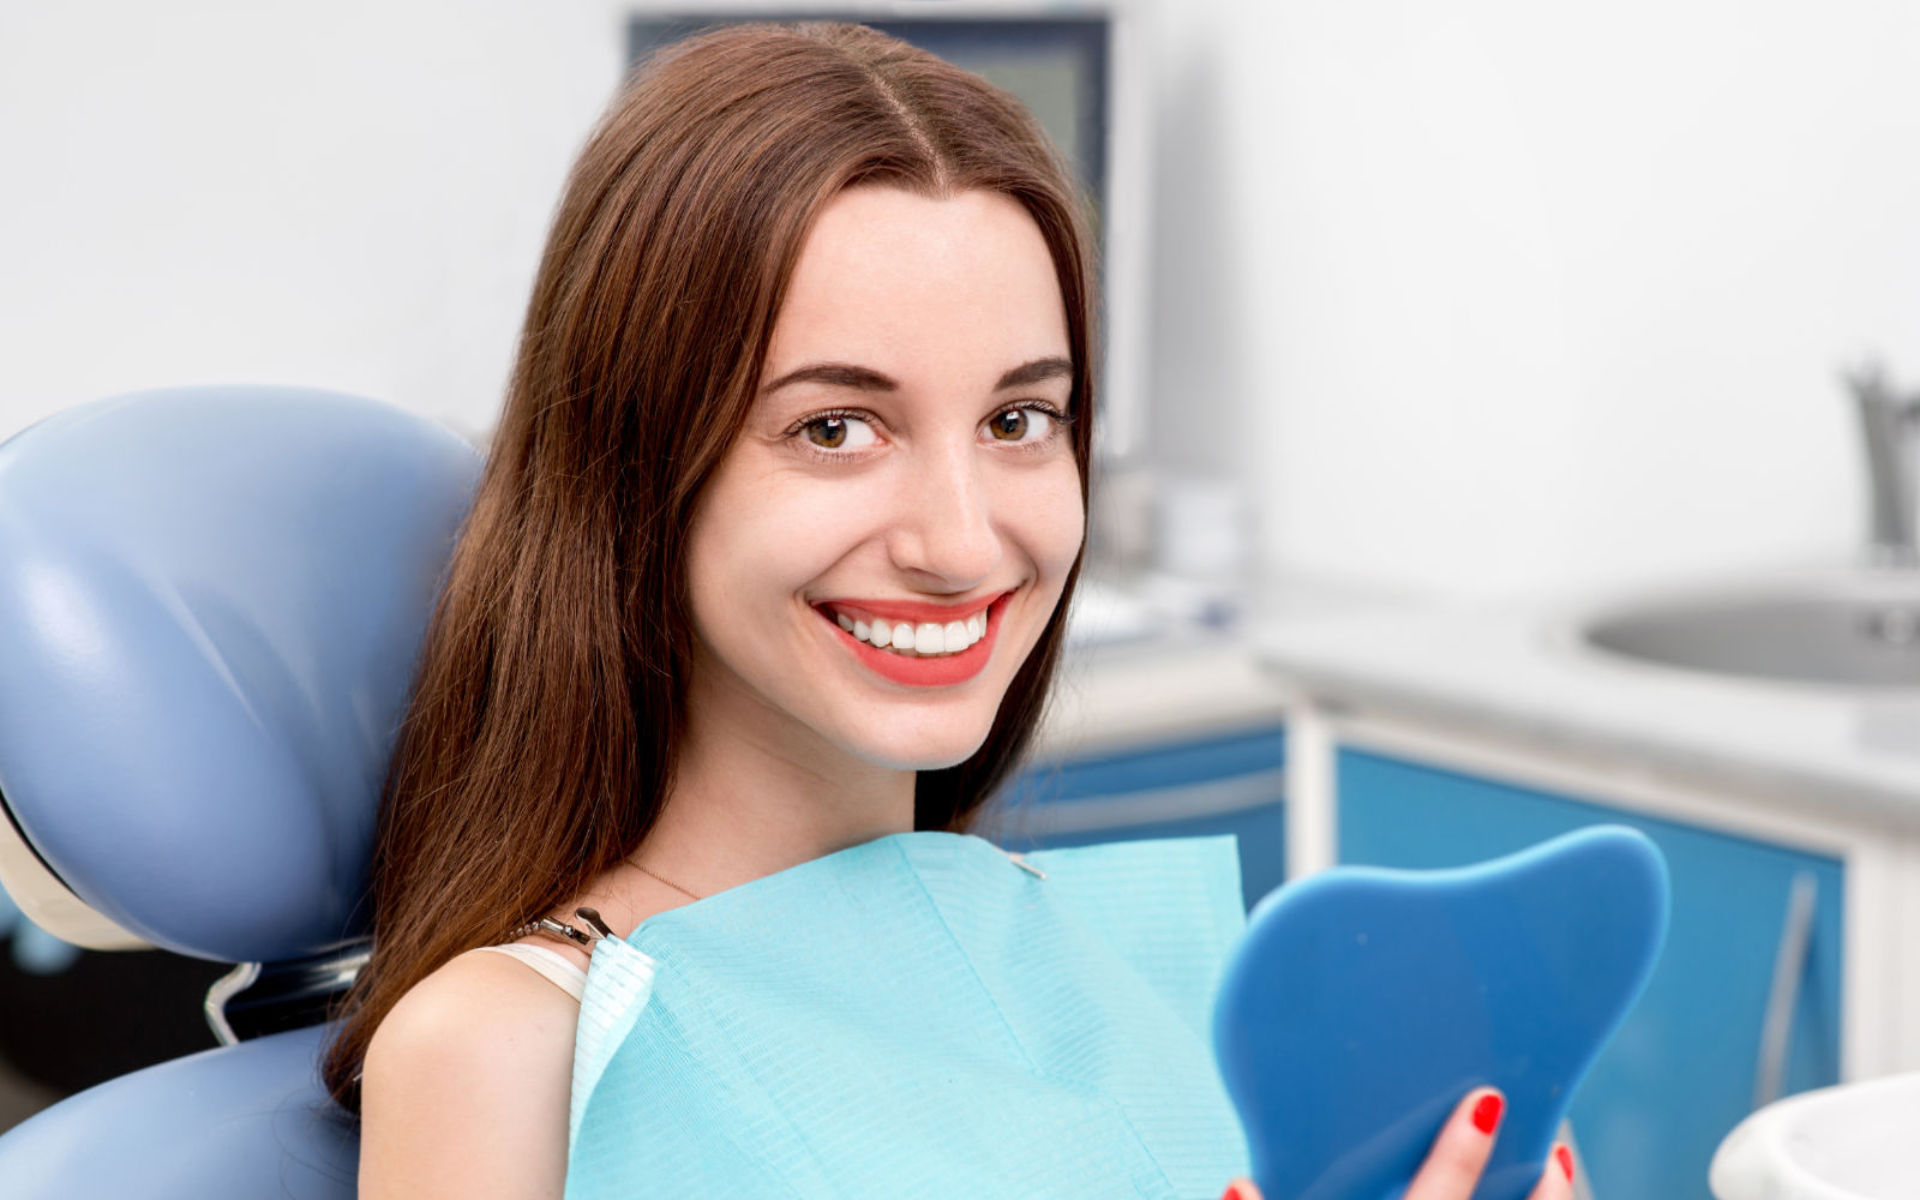 A satisfied young woman sitting in a dentist chair and looking at her beautiful teeth in a mirror.